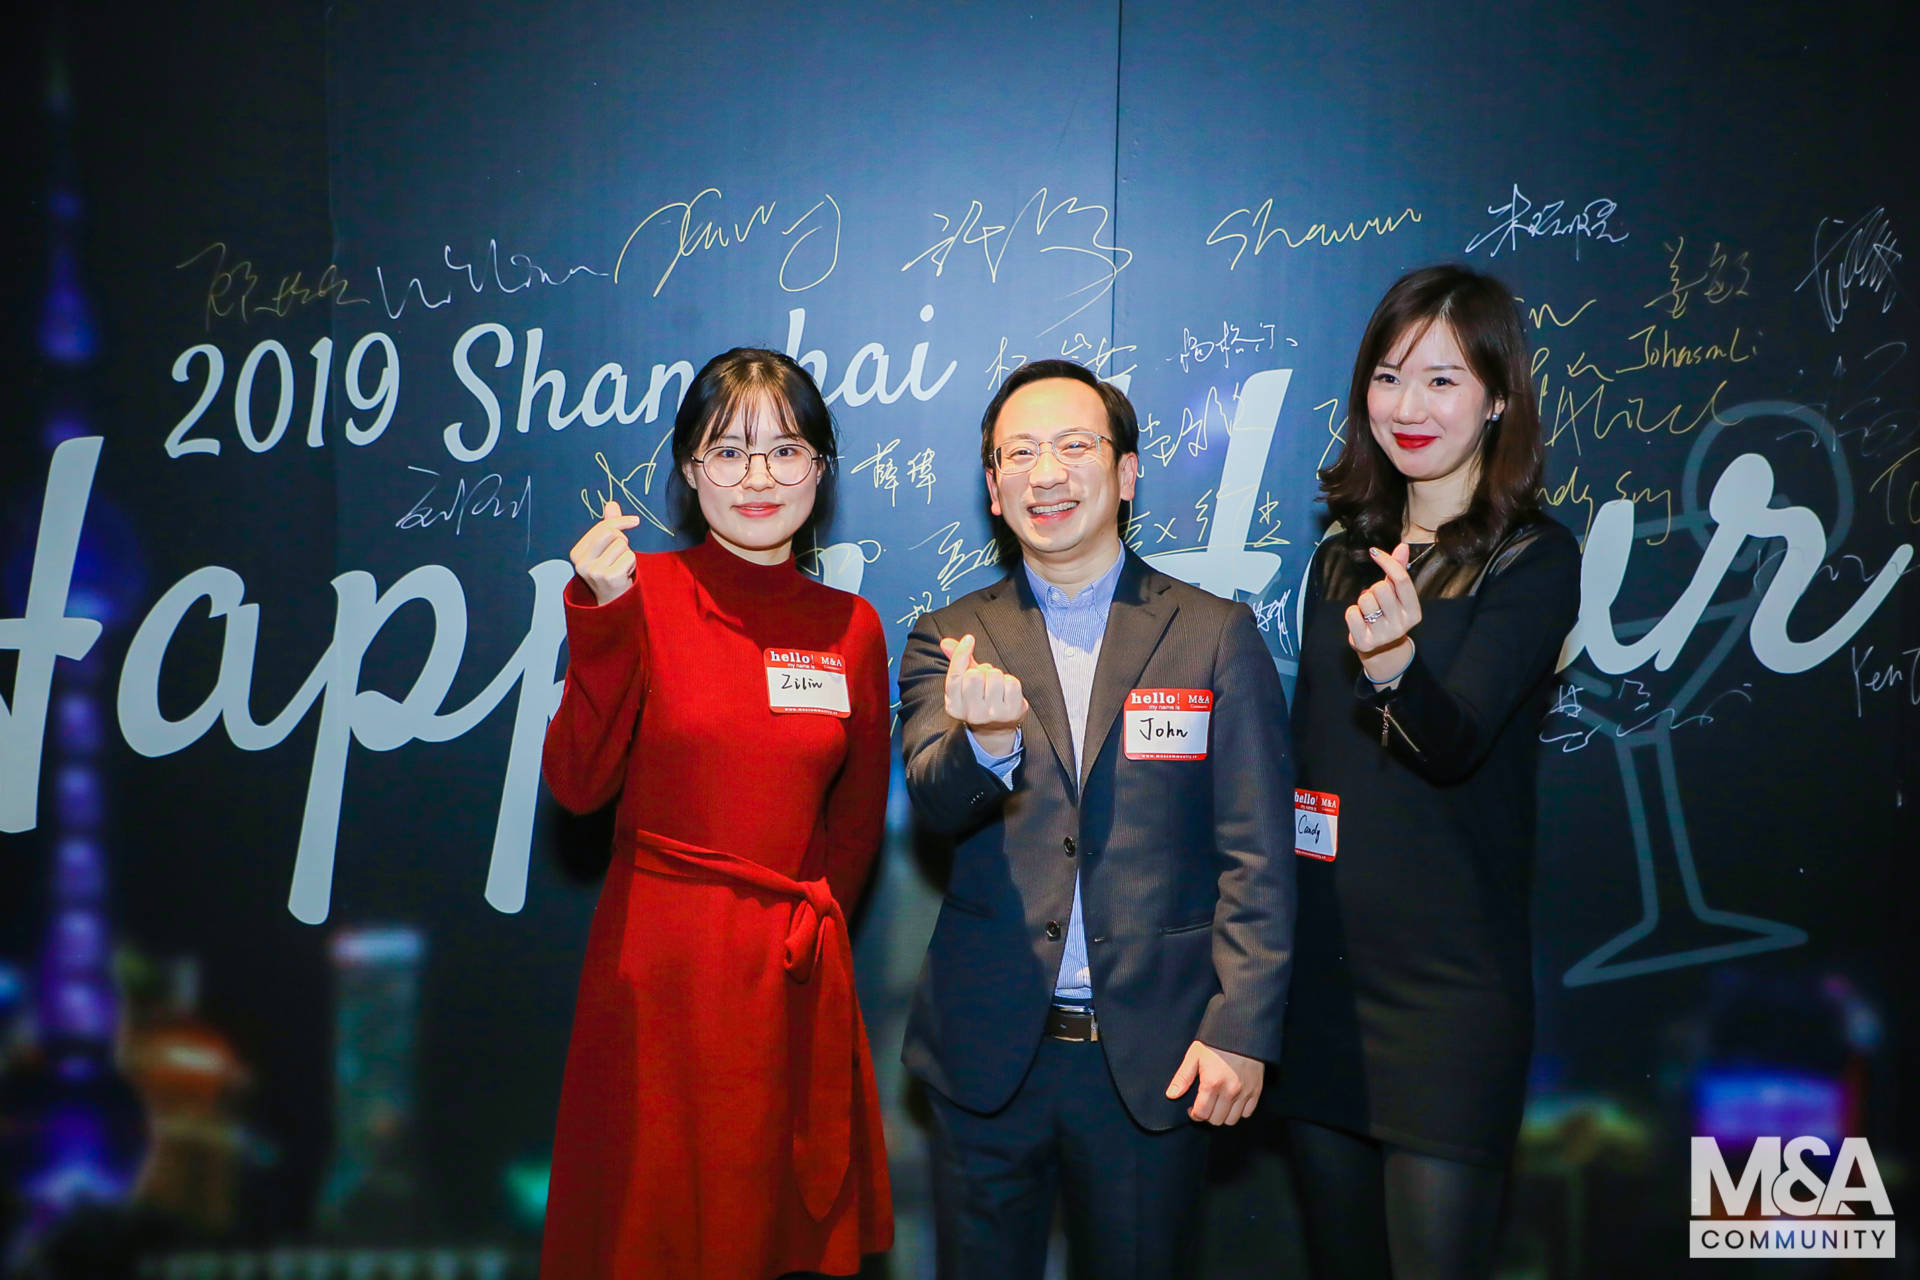 Shanghai Happy Hour - event by M&A Community